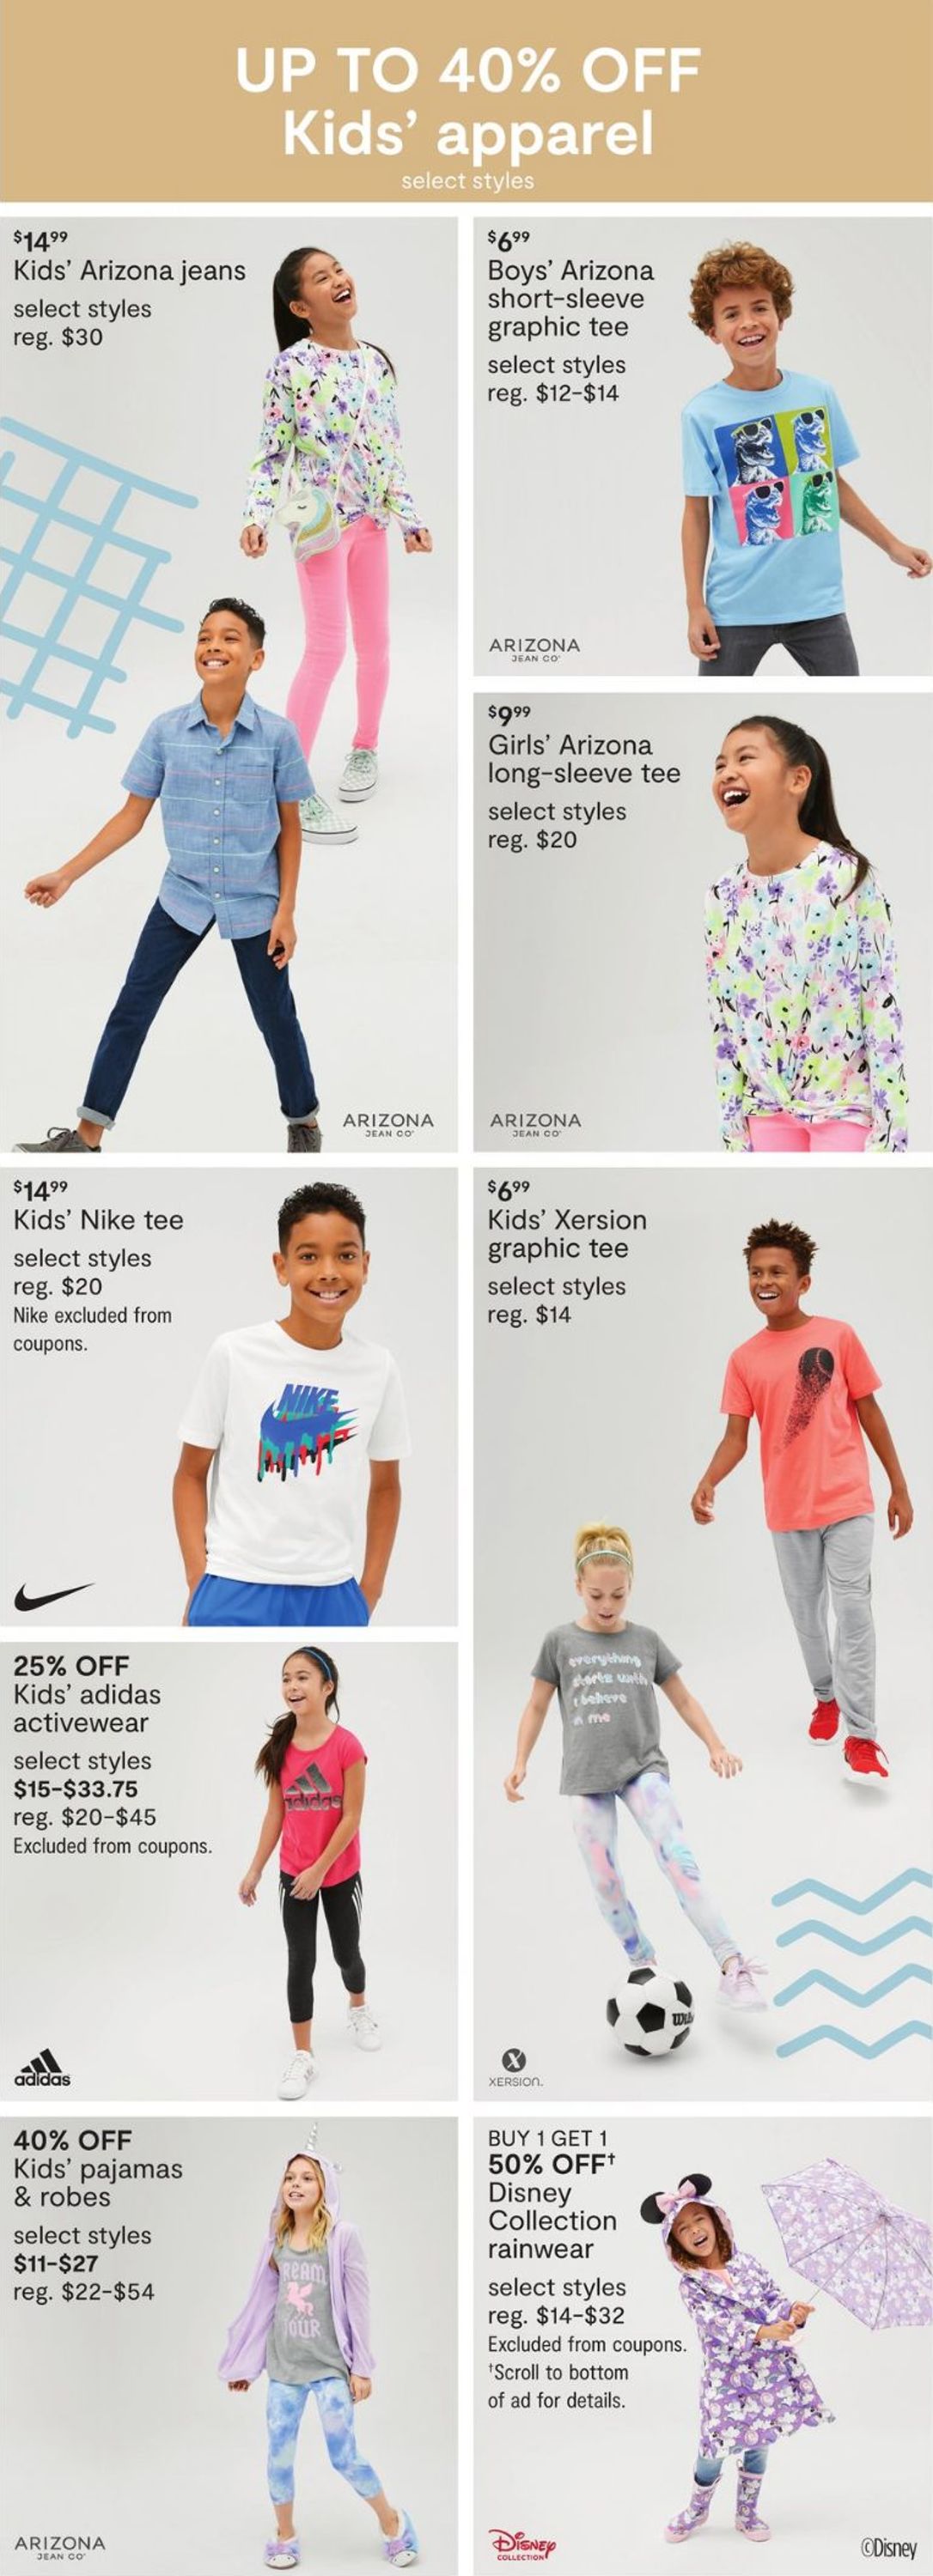 jcpenney nike polo shirt